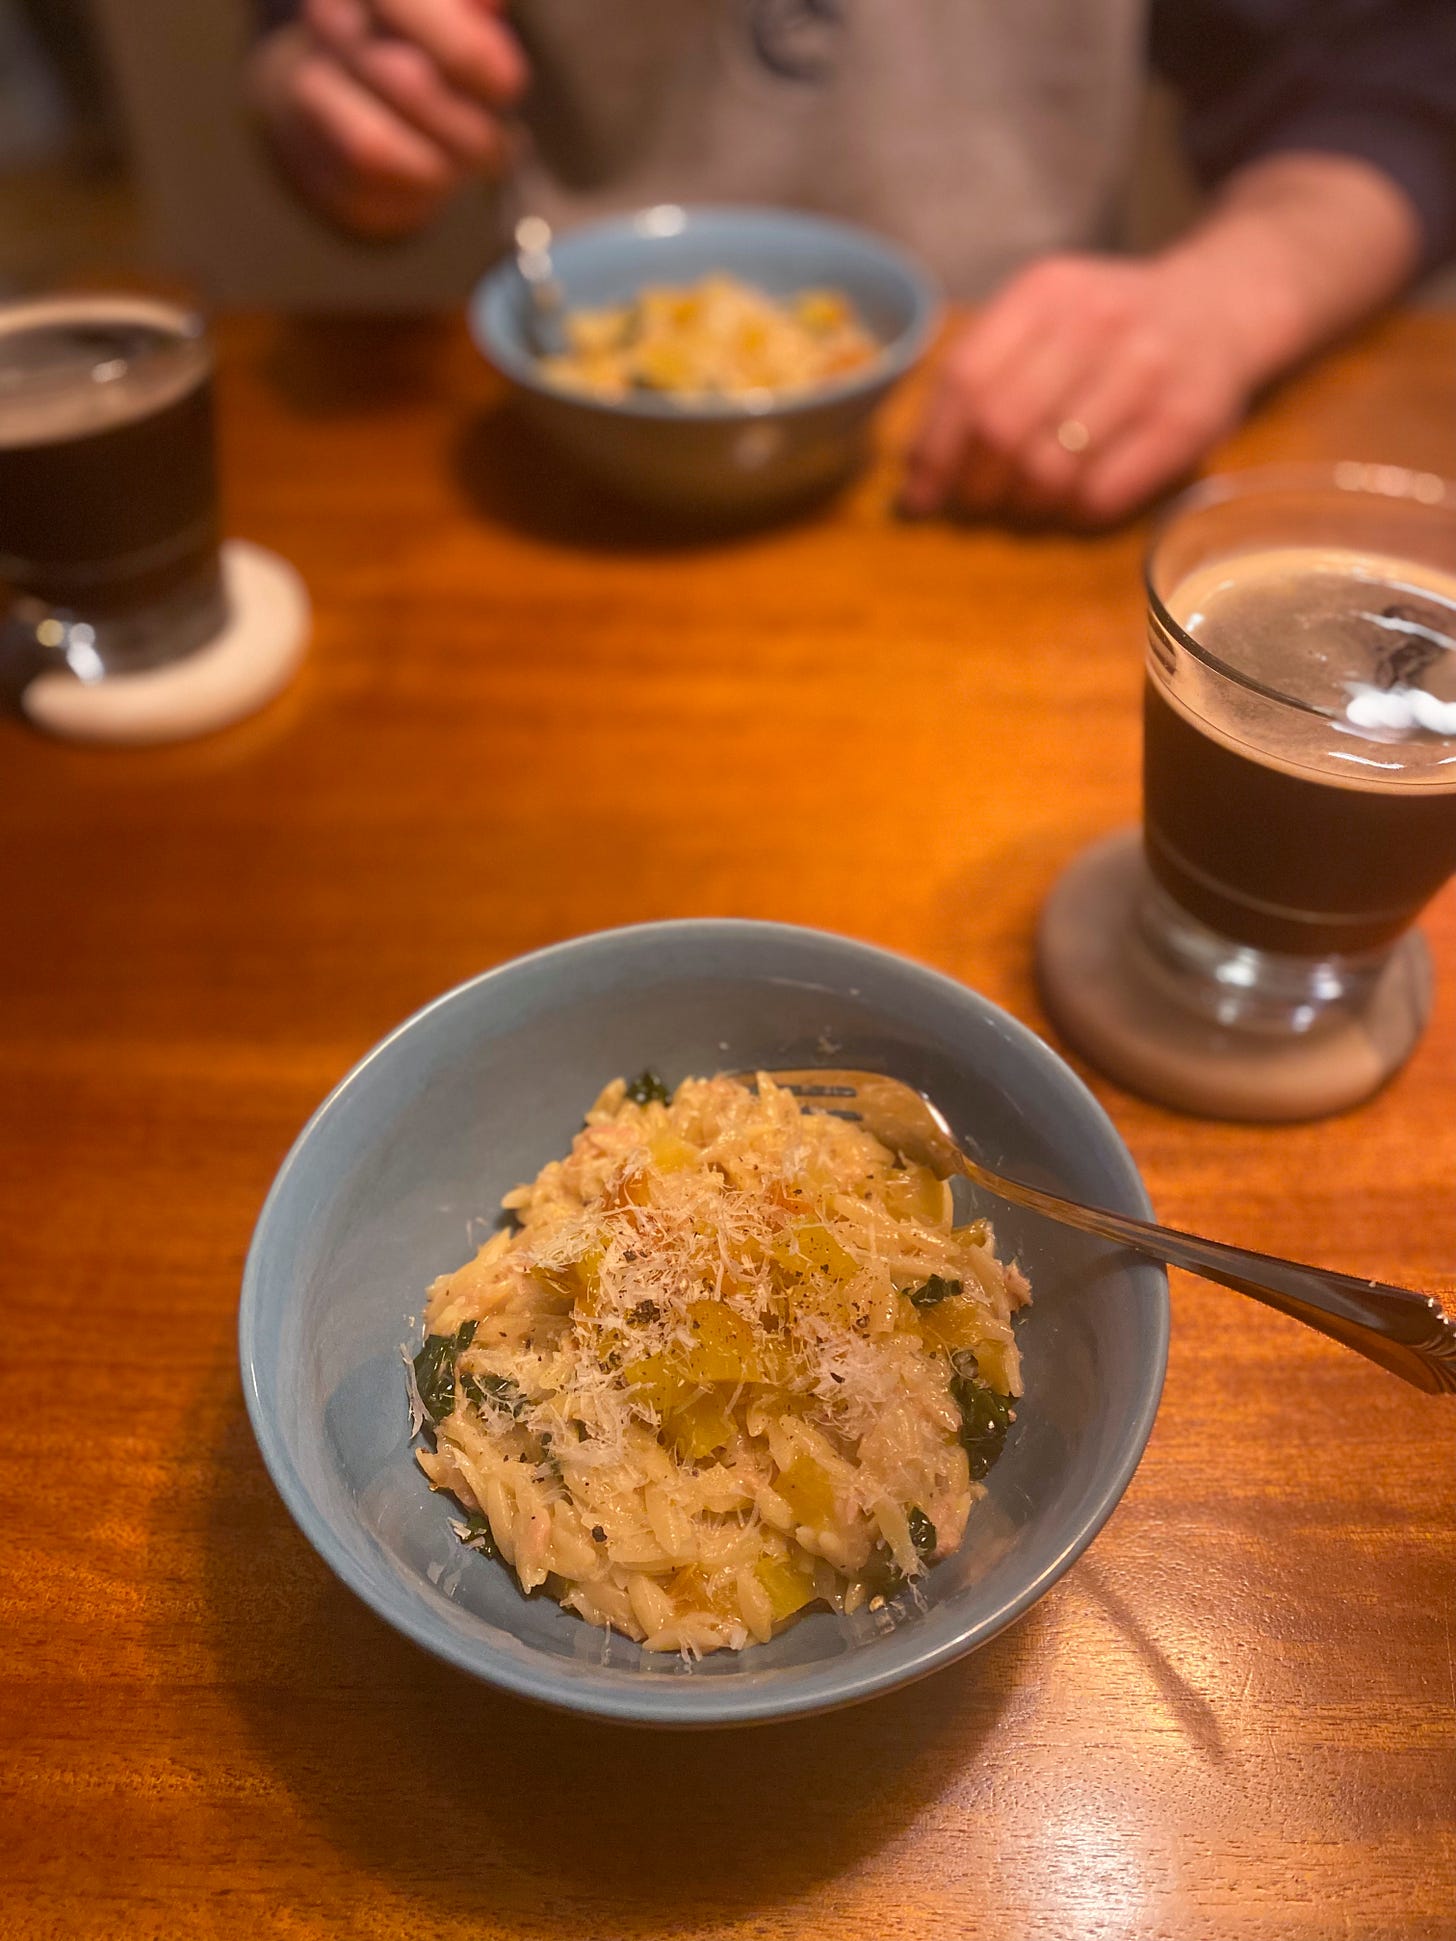 Two blue bowls of the orzo dish described above, dusted with parmesan and black pepper. Above and to the right of the bowl on coasters are glasses of dark beer. In the background, Jeff's hand rests on the table next to his bowl.